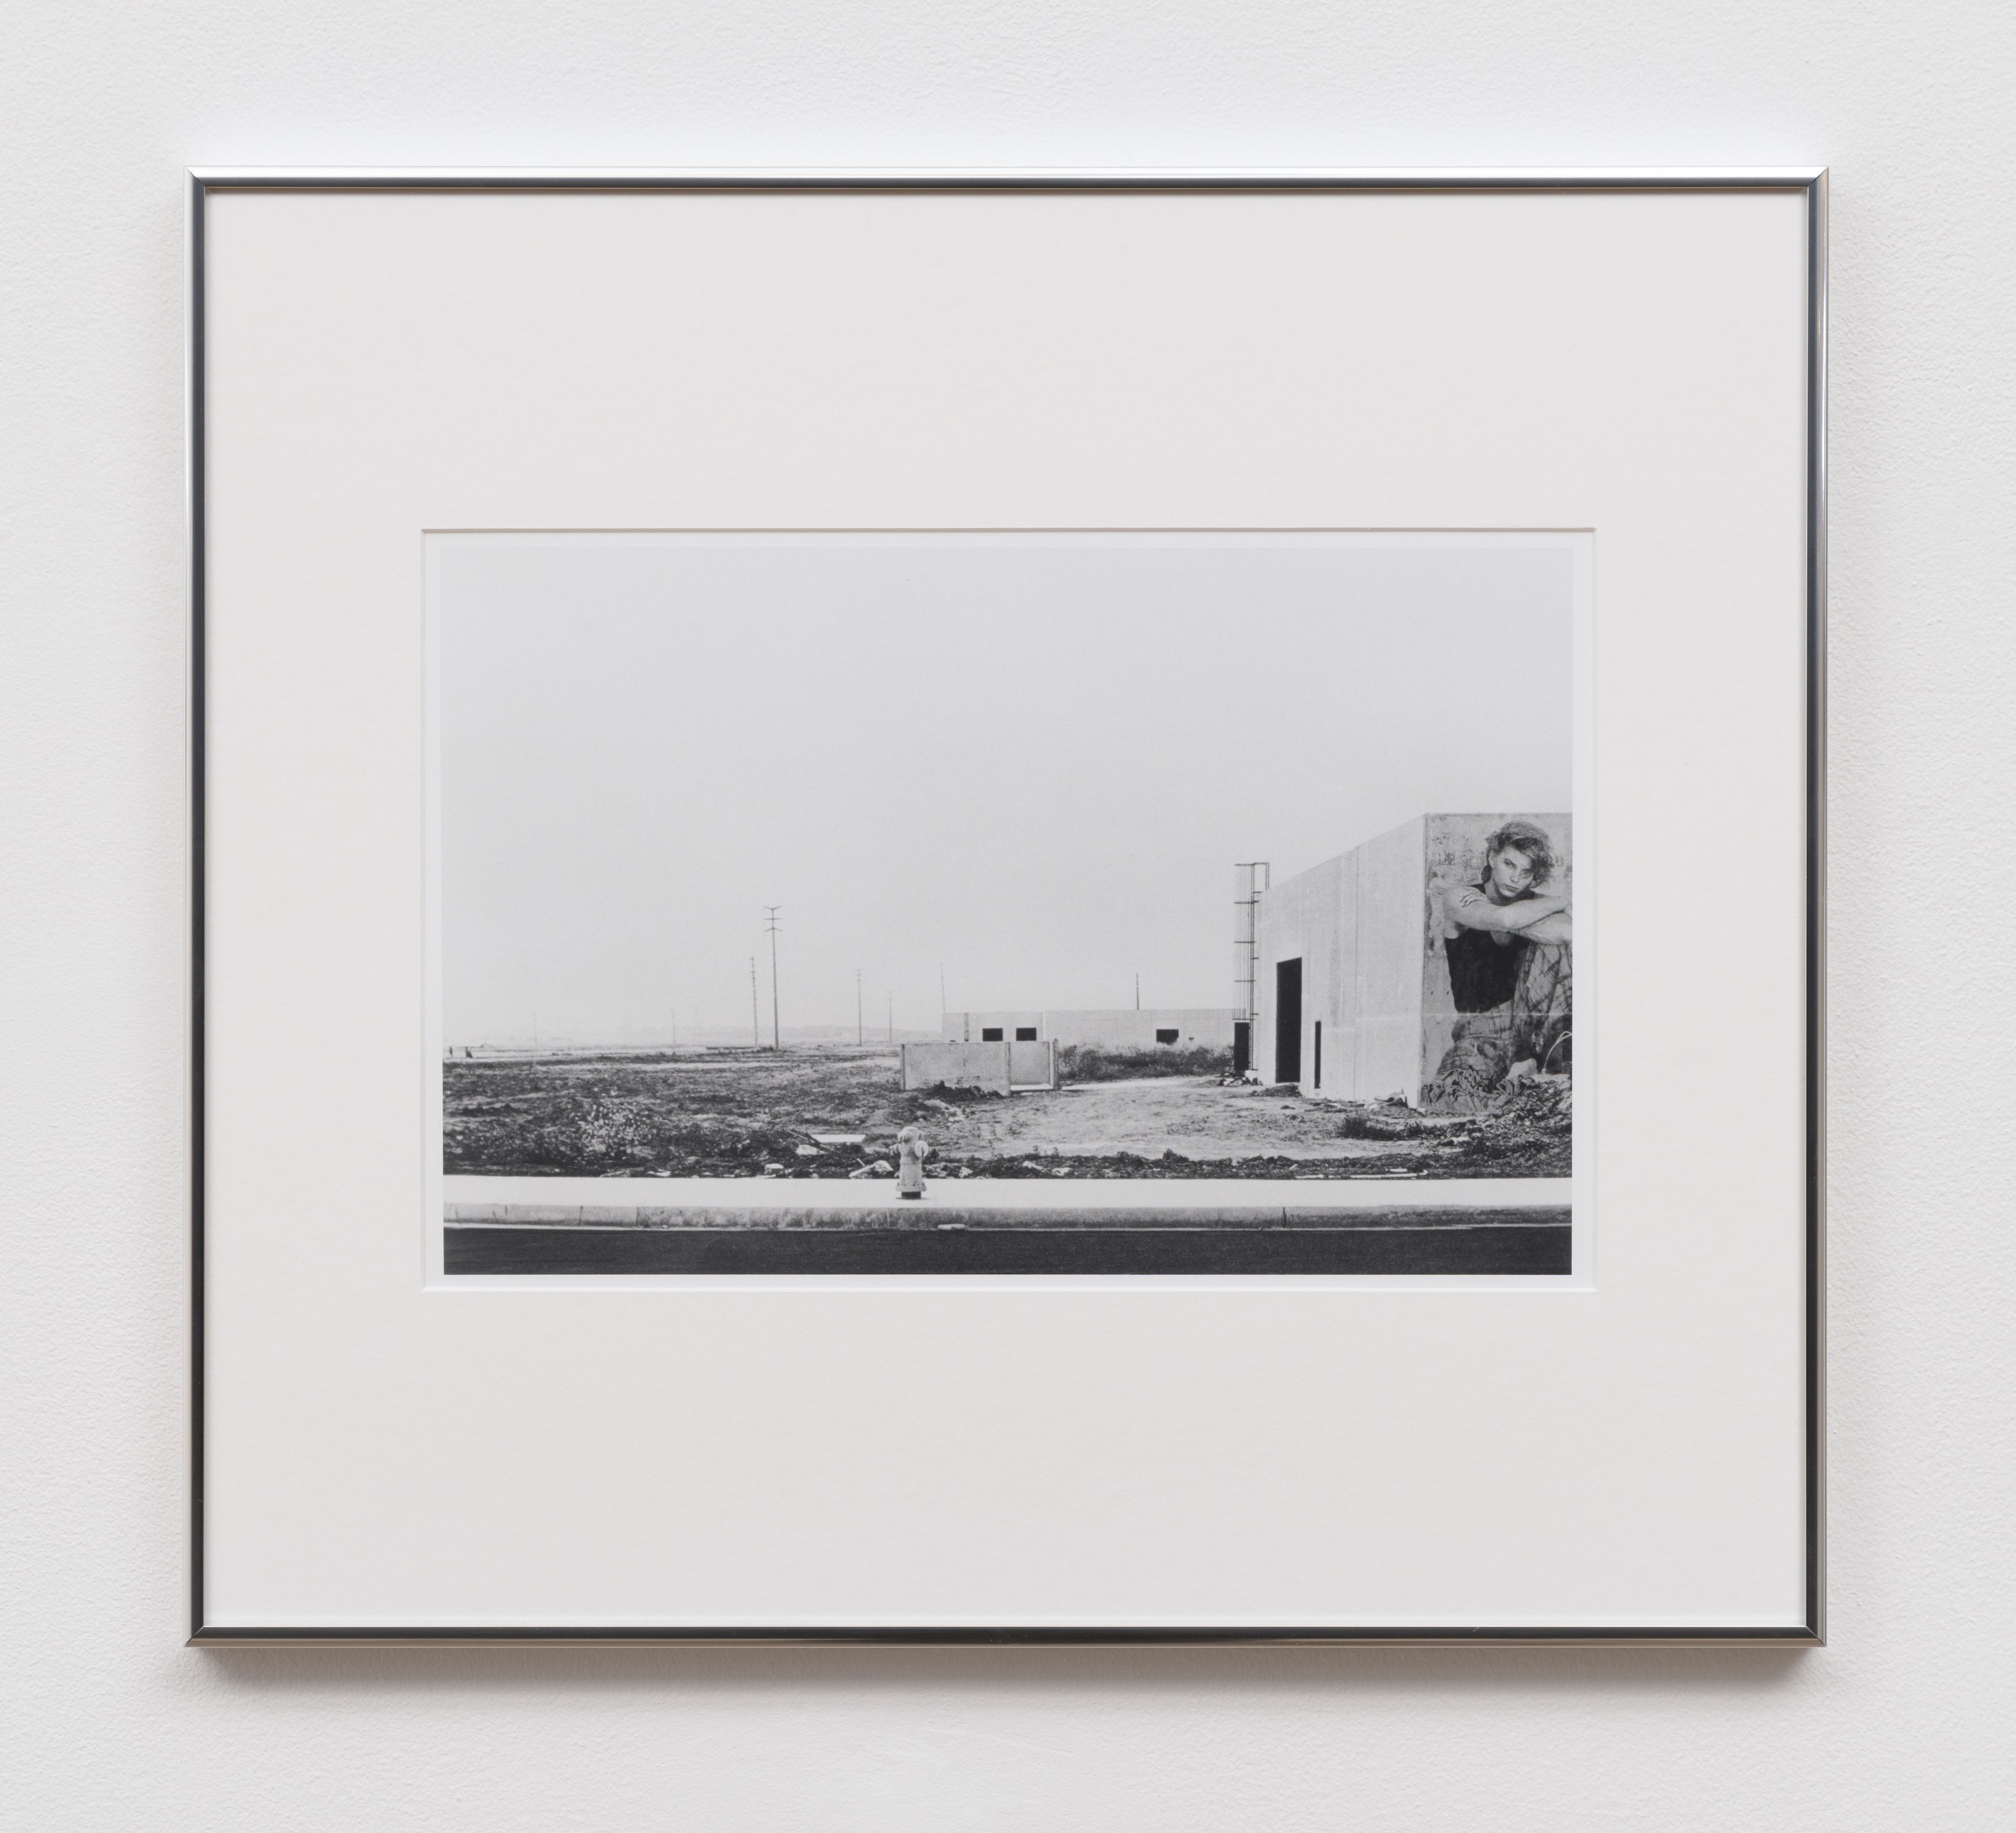 Erin Calla Watson, Alton Road at Murphy Road, looking toward, 2023, gelatin silver print, 8 9/10 x 14 in. (22.61 x 35.56 cm) (image size) 18 x 20 in. (45.72 x 50.08 cm) (framed size), edition of 3 with 2 AP